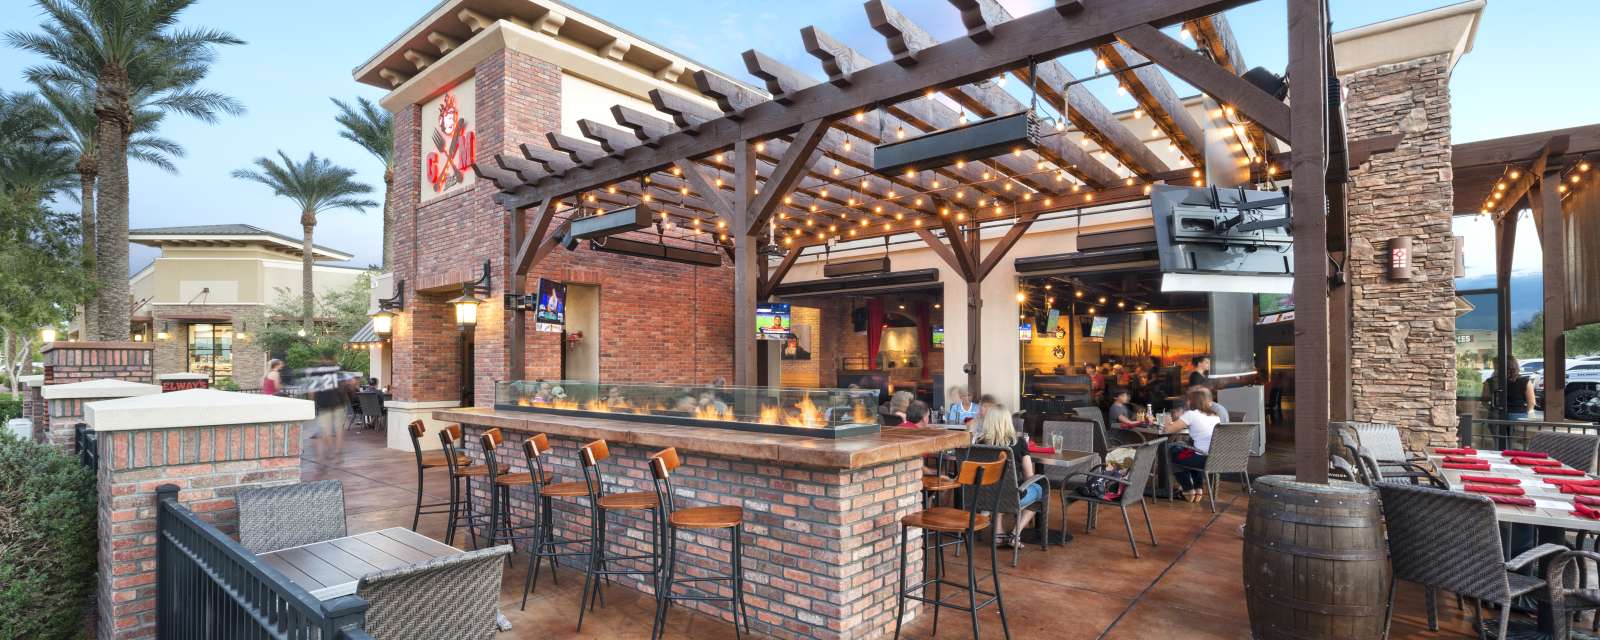 Chandler Patio Dining | Restaurants with Outdoor Seating